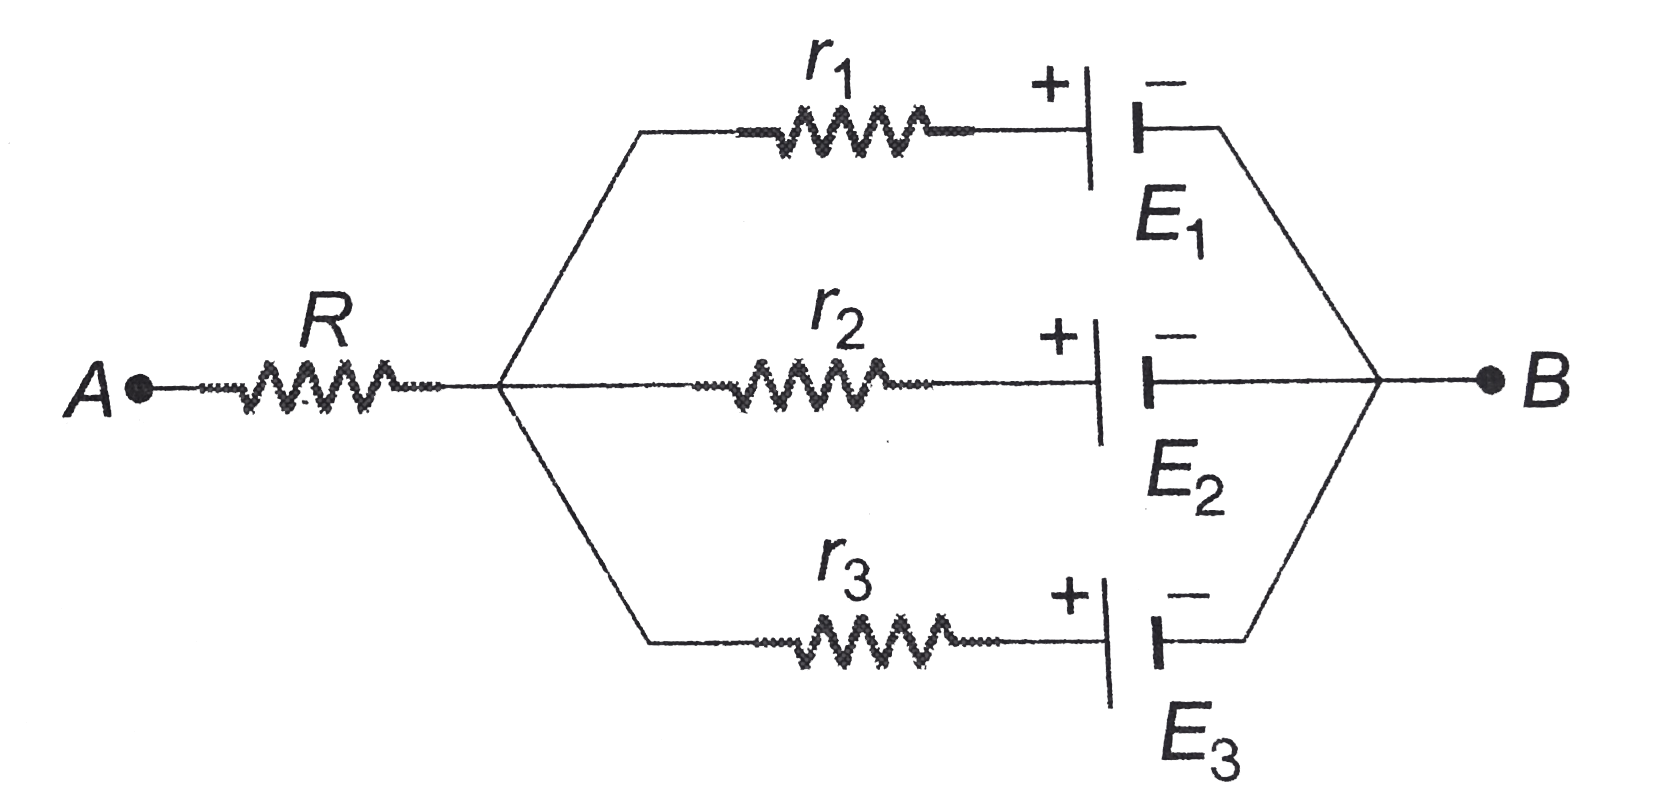 In the circuit in figure E1=3V, E2=2V, E3=1V and R=r1-r2-r3=1Omega      a. Find the potential differece between the points A and B and the currents through each branch.   b. If r2 is short circuited and the point A is connected to point B, find the currents through E1,E2, E3 and the resistor R